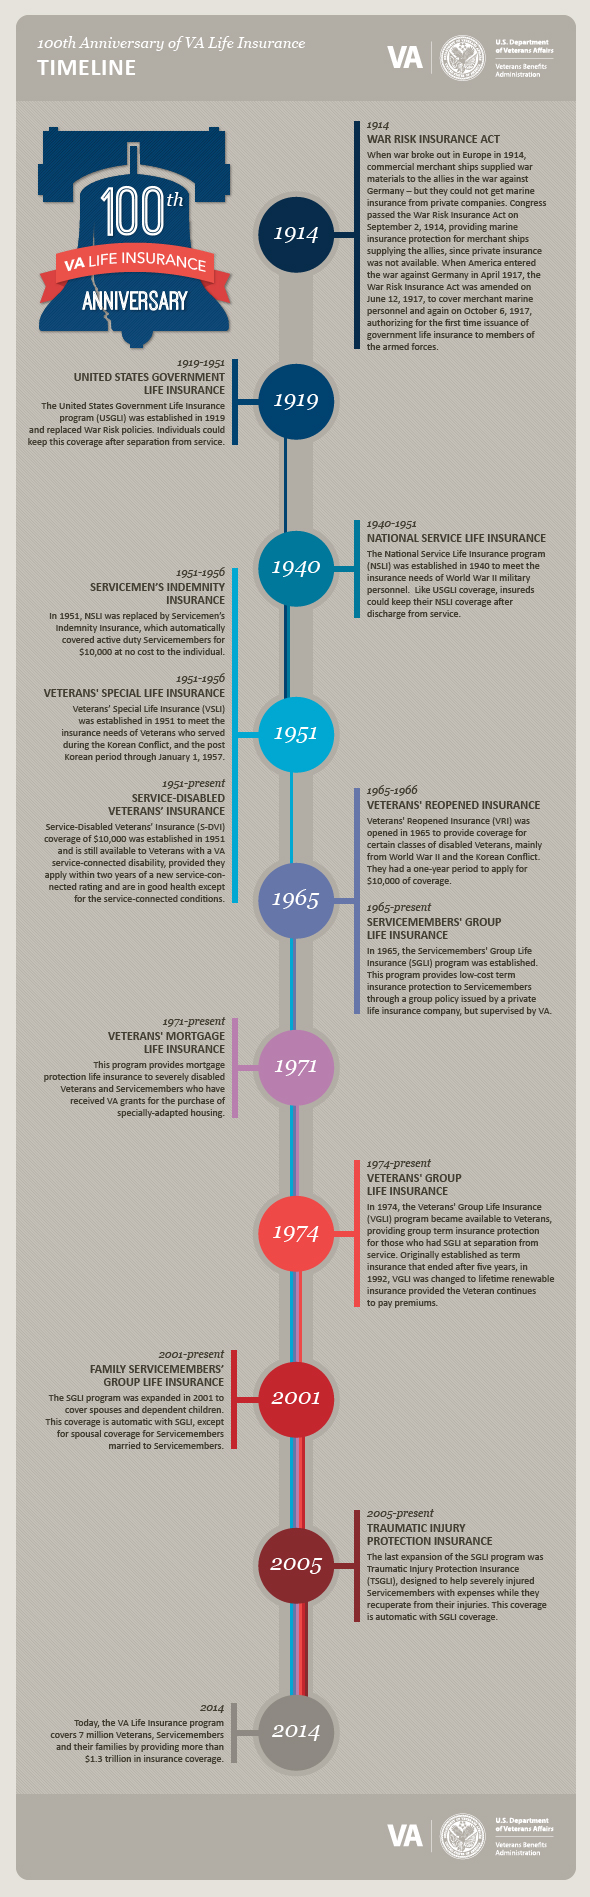 100th Anniversary of VA Life Insurance
Timeline.  1914 War Risk Insurance Act.  When war broke out in Europe in 1914, commercial merchant ships supplied war materials to the allies in the war against Germany – but they could not get marine insurance from private companies. Congress passed the War Risk Insurance Act on September 2, 1914, providing marine insurance protection for merchant ships supplying the allies, since private insurance was not available. When America entered the war against Germany in April 1917, the War Risk Insurance Act was amended on June 12, 1917, to cover merchant marine personnel and again on October 6, 1917, authorizing for the first time issuance of government life insurance to members of the armed forces.  1919-1951 United States Government Life Insurance .  The United States Government Life Insurance program (USGLI) was established in 1919 and replaced War Risk policies. Individuals could keep this coverage after separation from service.  1940-1951 National Service Life Insurance. 
The National Service Life Insurance program (NSLI) was established in 1940 to meet the insurance needs of World War II military personnel. Like USGLI coverage, insureds could keep their NSLI coverage after discharge from service.  1951-1956  Servicemen’s Indemnity Insurance.  In 1951, NSLI was replaced by Servicemen’s Indemnity Insurance, which automatically covered active duty Servicemembers for $10,000 at no cost to the individual. 
1951-1956 Veterans’ Special Life Insurance.  Veterans’ Special Life Insurance (VSLI) was established in 1951 to meet the insurance needs of Veterans who served during the Korean Conflict, and the post Korean period through January 1, 1957. 1951-present Service-Disabled Veterans’ Insurance. Service-Disabled Veterans’ Insurance (S-DVI) coverage of $10,000 was established in 1951 and is still available to Veterans with a VA service-connected disability, provided they apply within two years of a new service-connected rating and are in good health except for the service-connected conditions.  1965-1966 Veterans’ Reopened Insurance.   Veterans’ Reopened Insurance (VRI) was opened in 1965 to provide coverage for certain classes of disabled Veterans, mainly from World War II and the Korean Conflict.  They had a one-year period to apply for $10,000 of coverage.  1965-present Servicemembers’ Group Life Insurance.  In 1965, the Servicemembers’ Group Life Insurance (SGLI) program was established. This program provides low-cost term insurance protection to Servicemembers through a group policy issued by a private life insurance company, but supervised by VA.  1971-present Veterans’ Mortgage Life Insurance.  This program provides mortgage protection life insurance to severely disabled Veterans and Servicemembers who have received VA grants for the purchase of specially-adapted housing.  1974-present  Veterans’ Group Life Insurance
In 1974, the Veterans’ Group Life Insurance (VGLI) program became available to Veterans, providing group term insurance protection for those who had SGLI at separation from service. Originally established as term insurance that ended after five years, in 1992, VGLI was changed to lifetime renewable insurance provided the Veteran continues to pay premiums.  2001-present   Family Servicemembers’ Group Life Insurance. The SGLI program was expanded in 2001 to cover spouses and dependent children. This coverage is automatic with SGLI, except for spousal coverage for Servicemembers married to Servicemembers.  2005-present  Traumatic Injury Protection Insurance.  The last expansion of the SGLI program was Traumatic Injury Protection Insurance (TSGLI), designed to help severely injured Servicemembers with expenses while they recuperate from their injuries. This coverage is automatic with SGLI coverage.  2014  Today, the VA Life Insurance program covers 7 million Veterans, Servicemembers and their families by providing more than $1.3 trillion in insurance coverage.   Please see PDF Download link to view an accessible PDF that addresses the text content of this document.